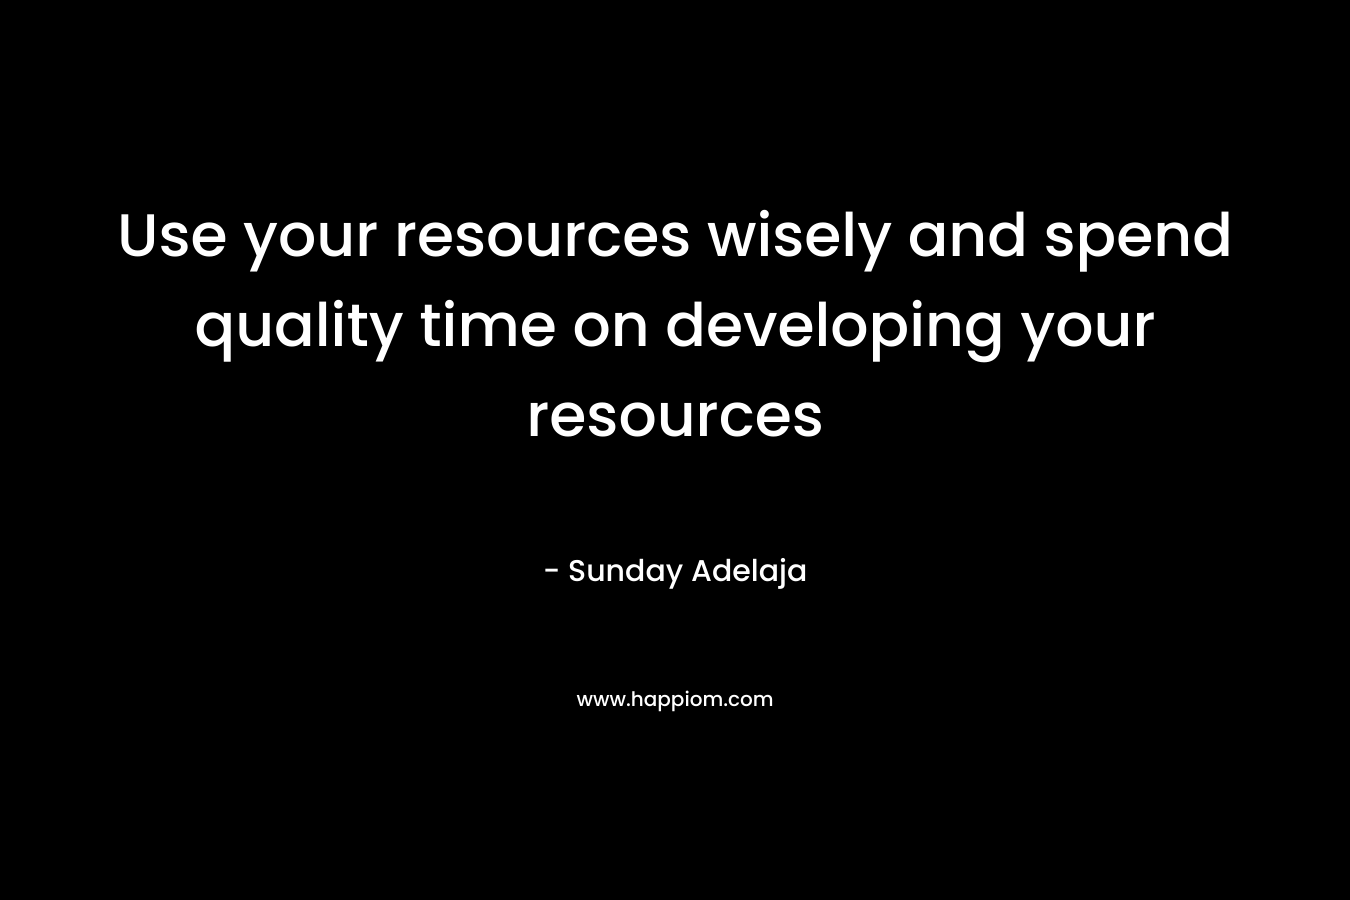 Use your resources wisely and spend quality time on developing your resources